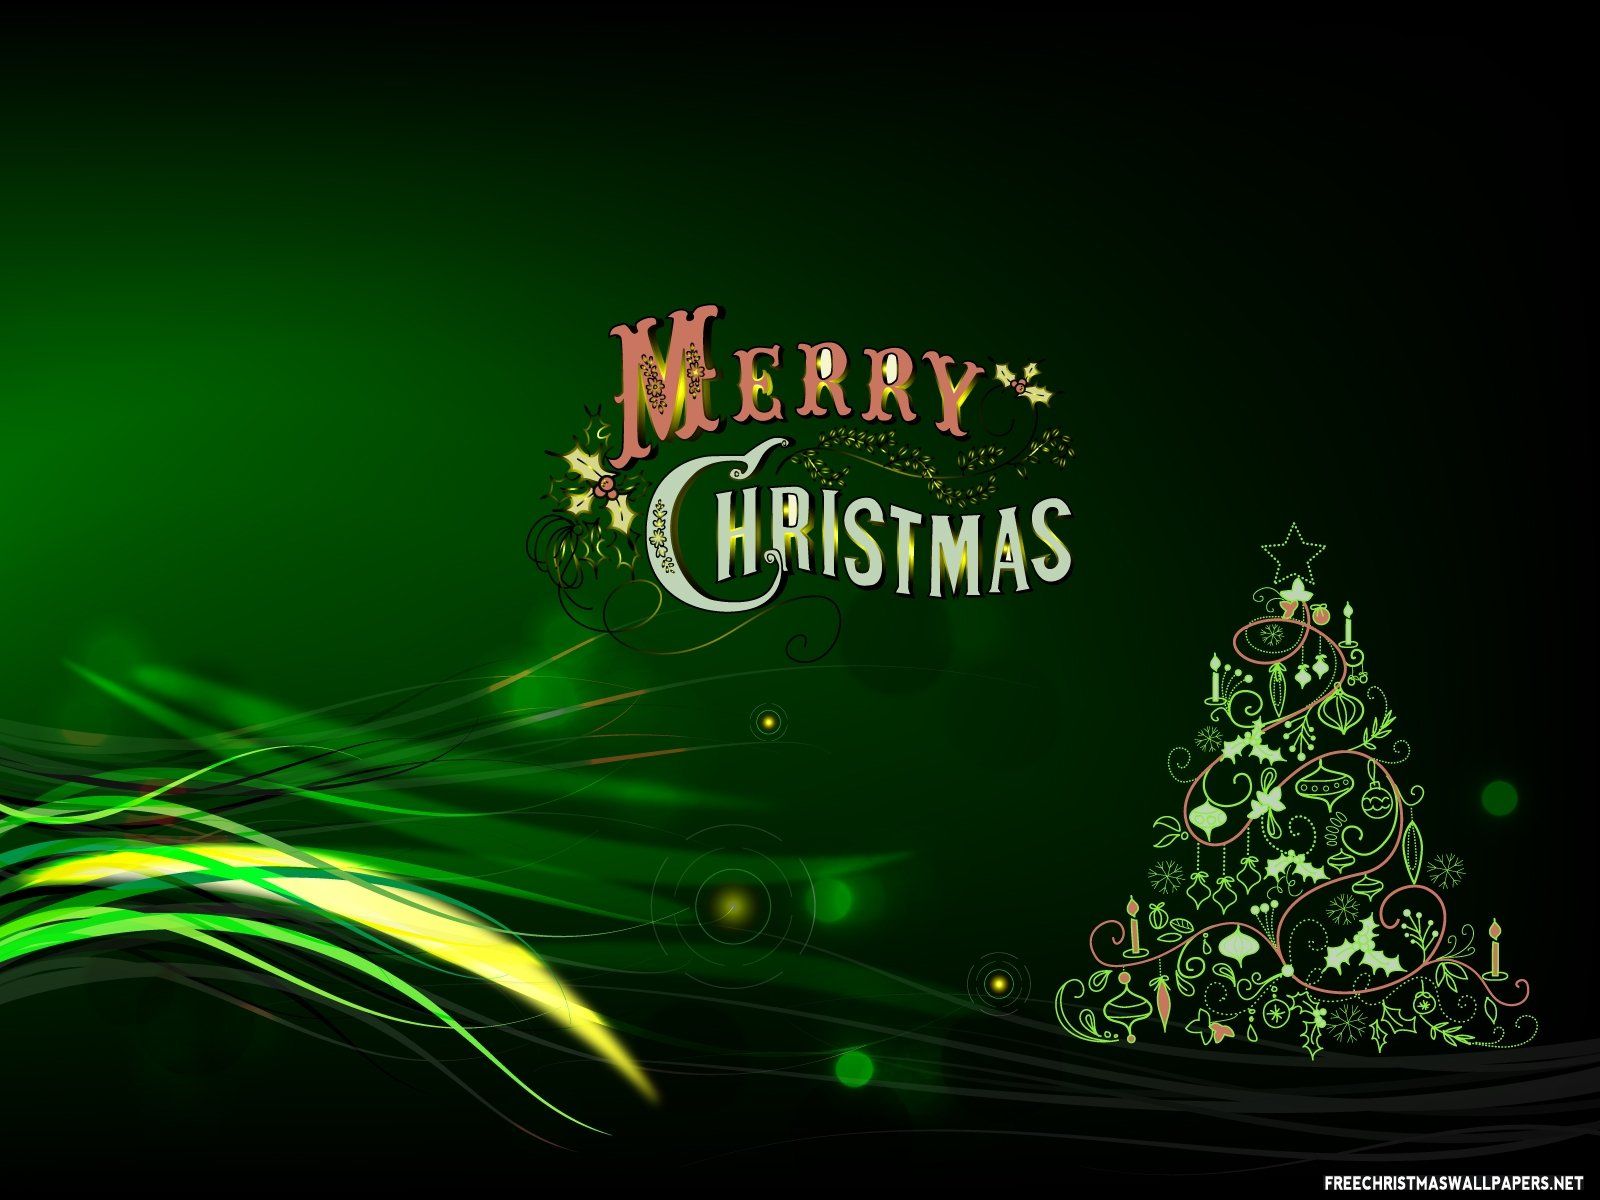 That Says Merry Christmas Wallpaper 1600×1200